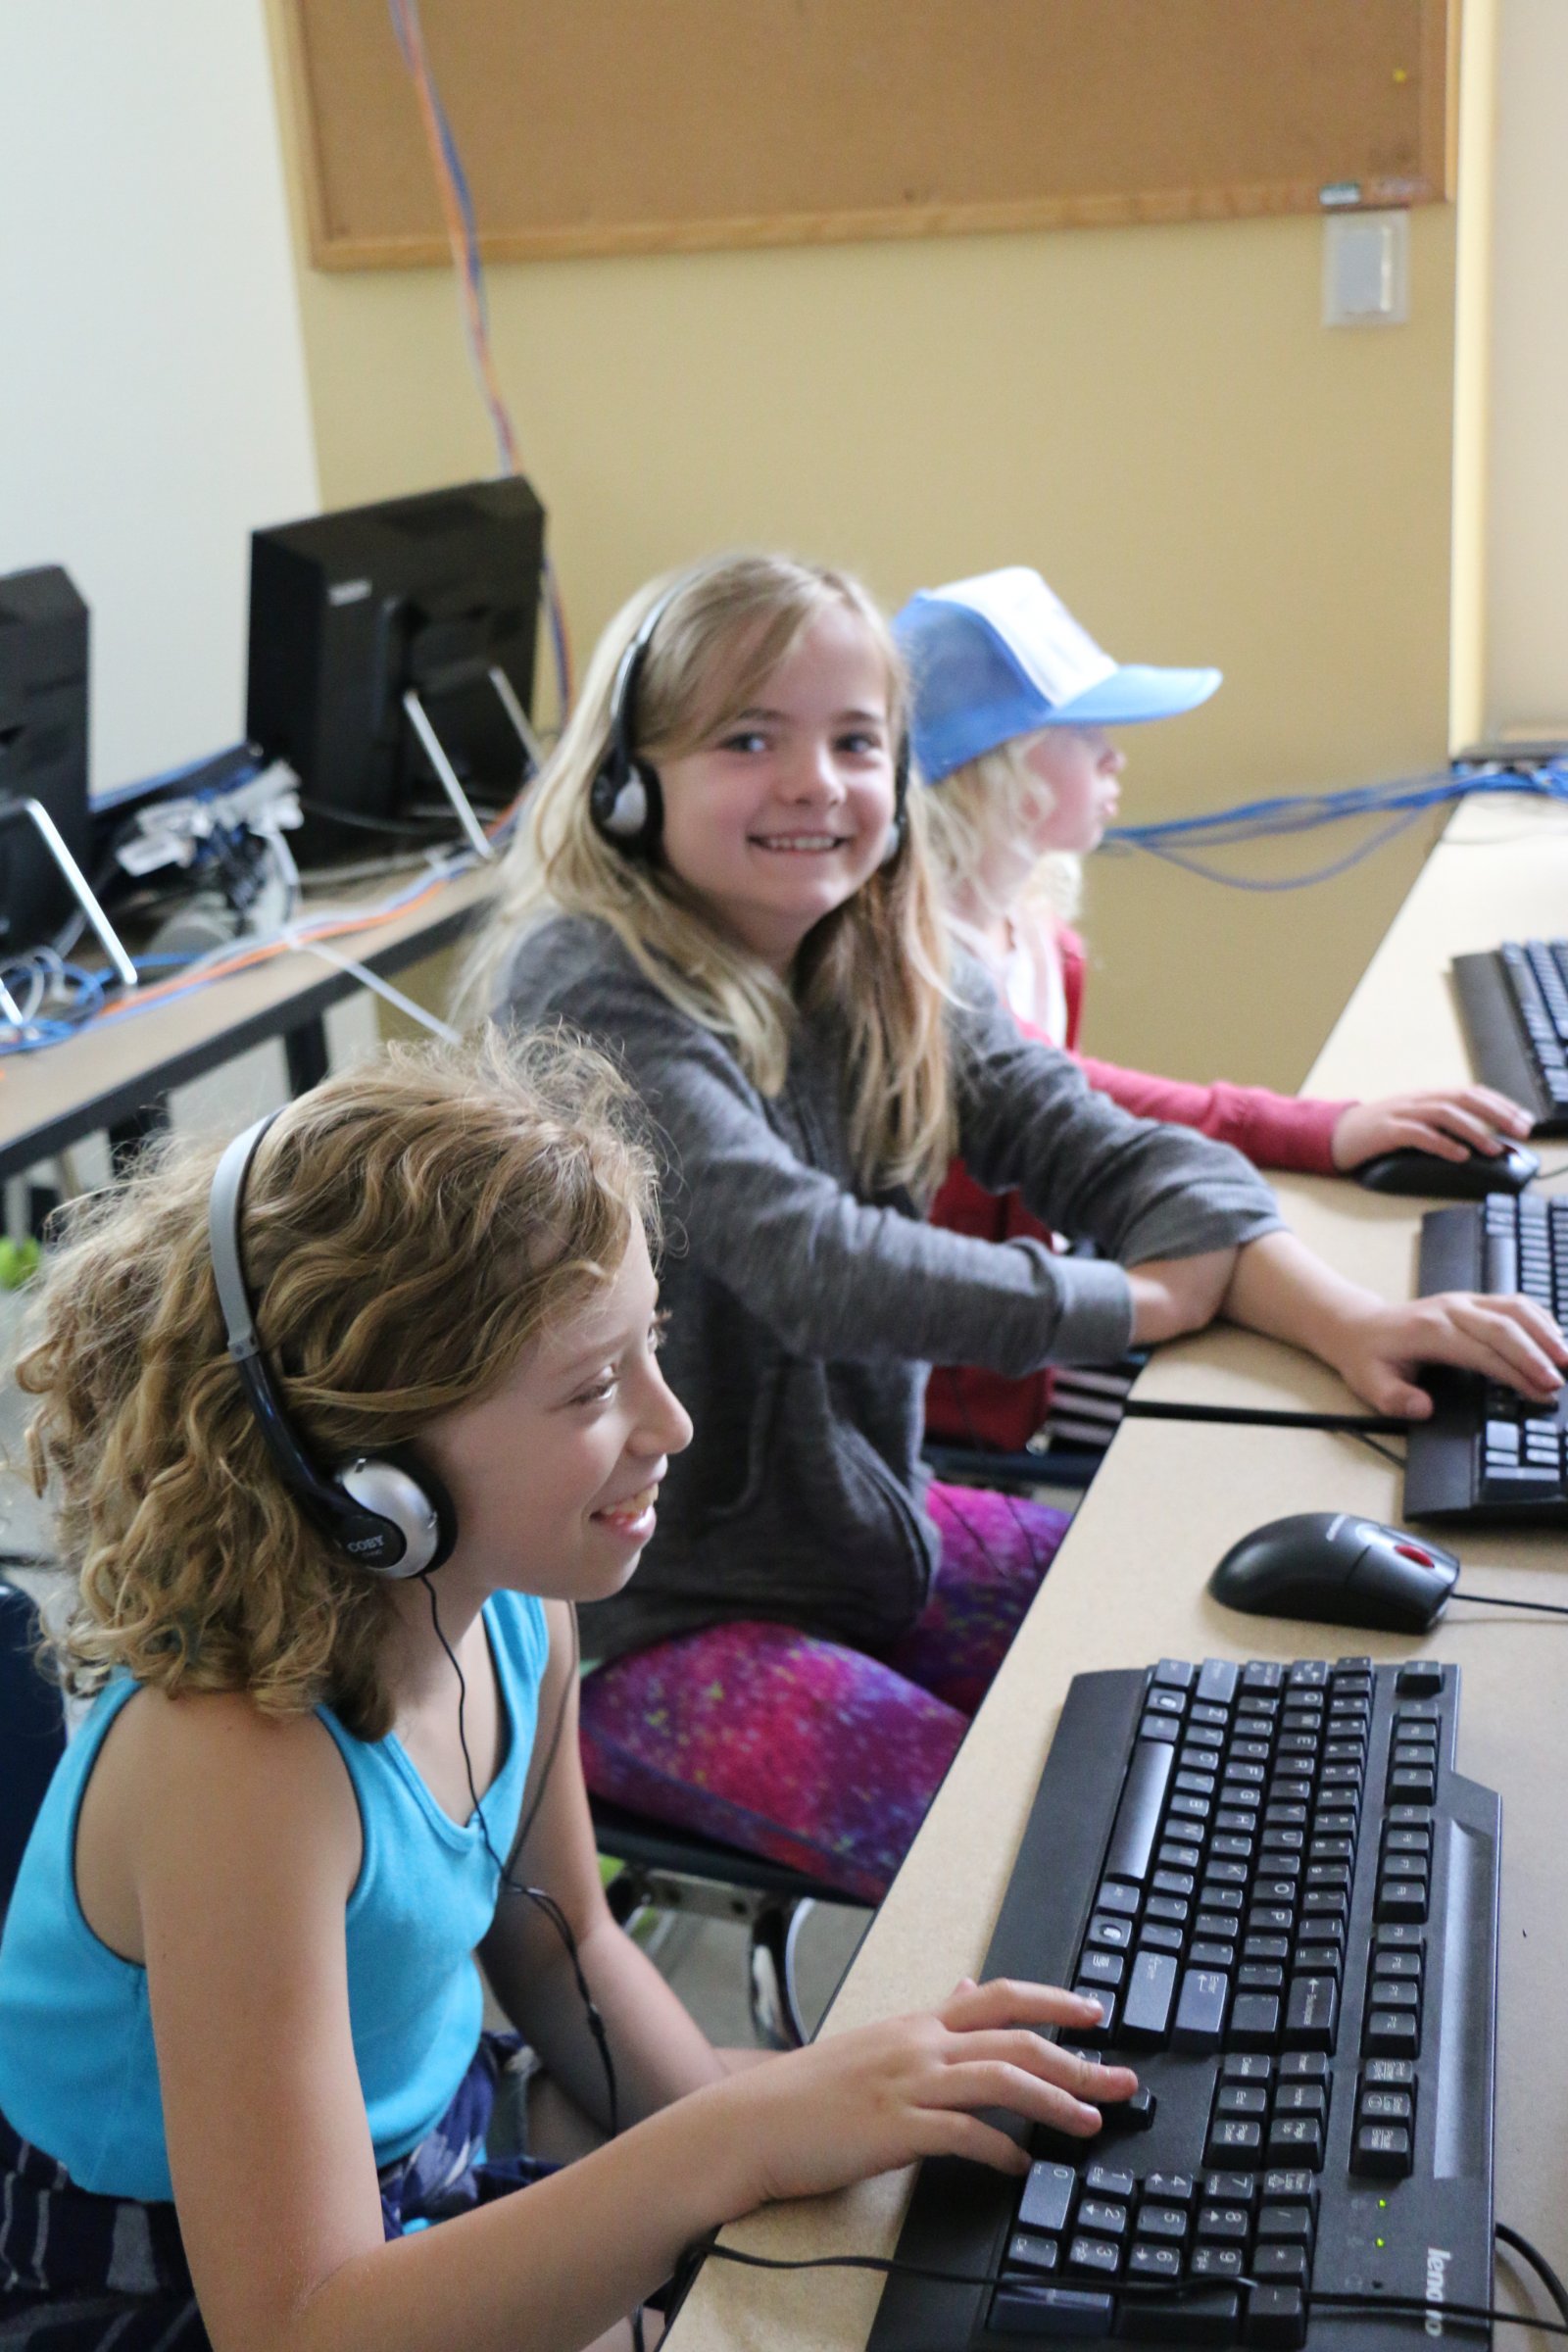 Saturday Academy girls learning to code in summer camp